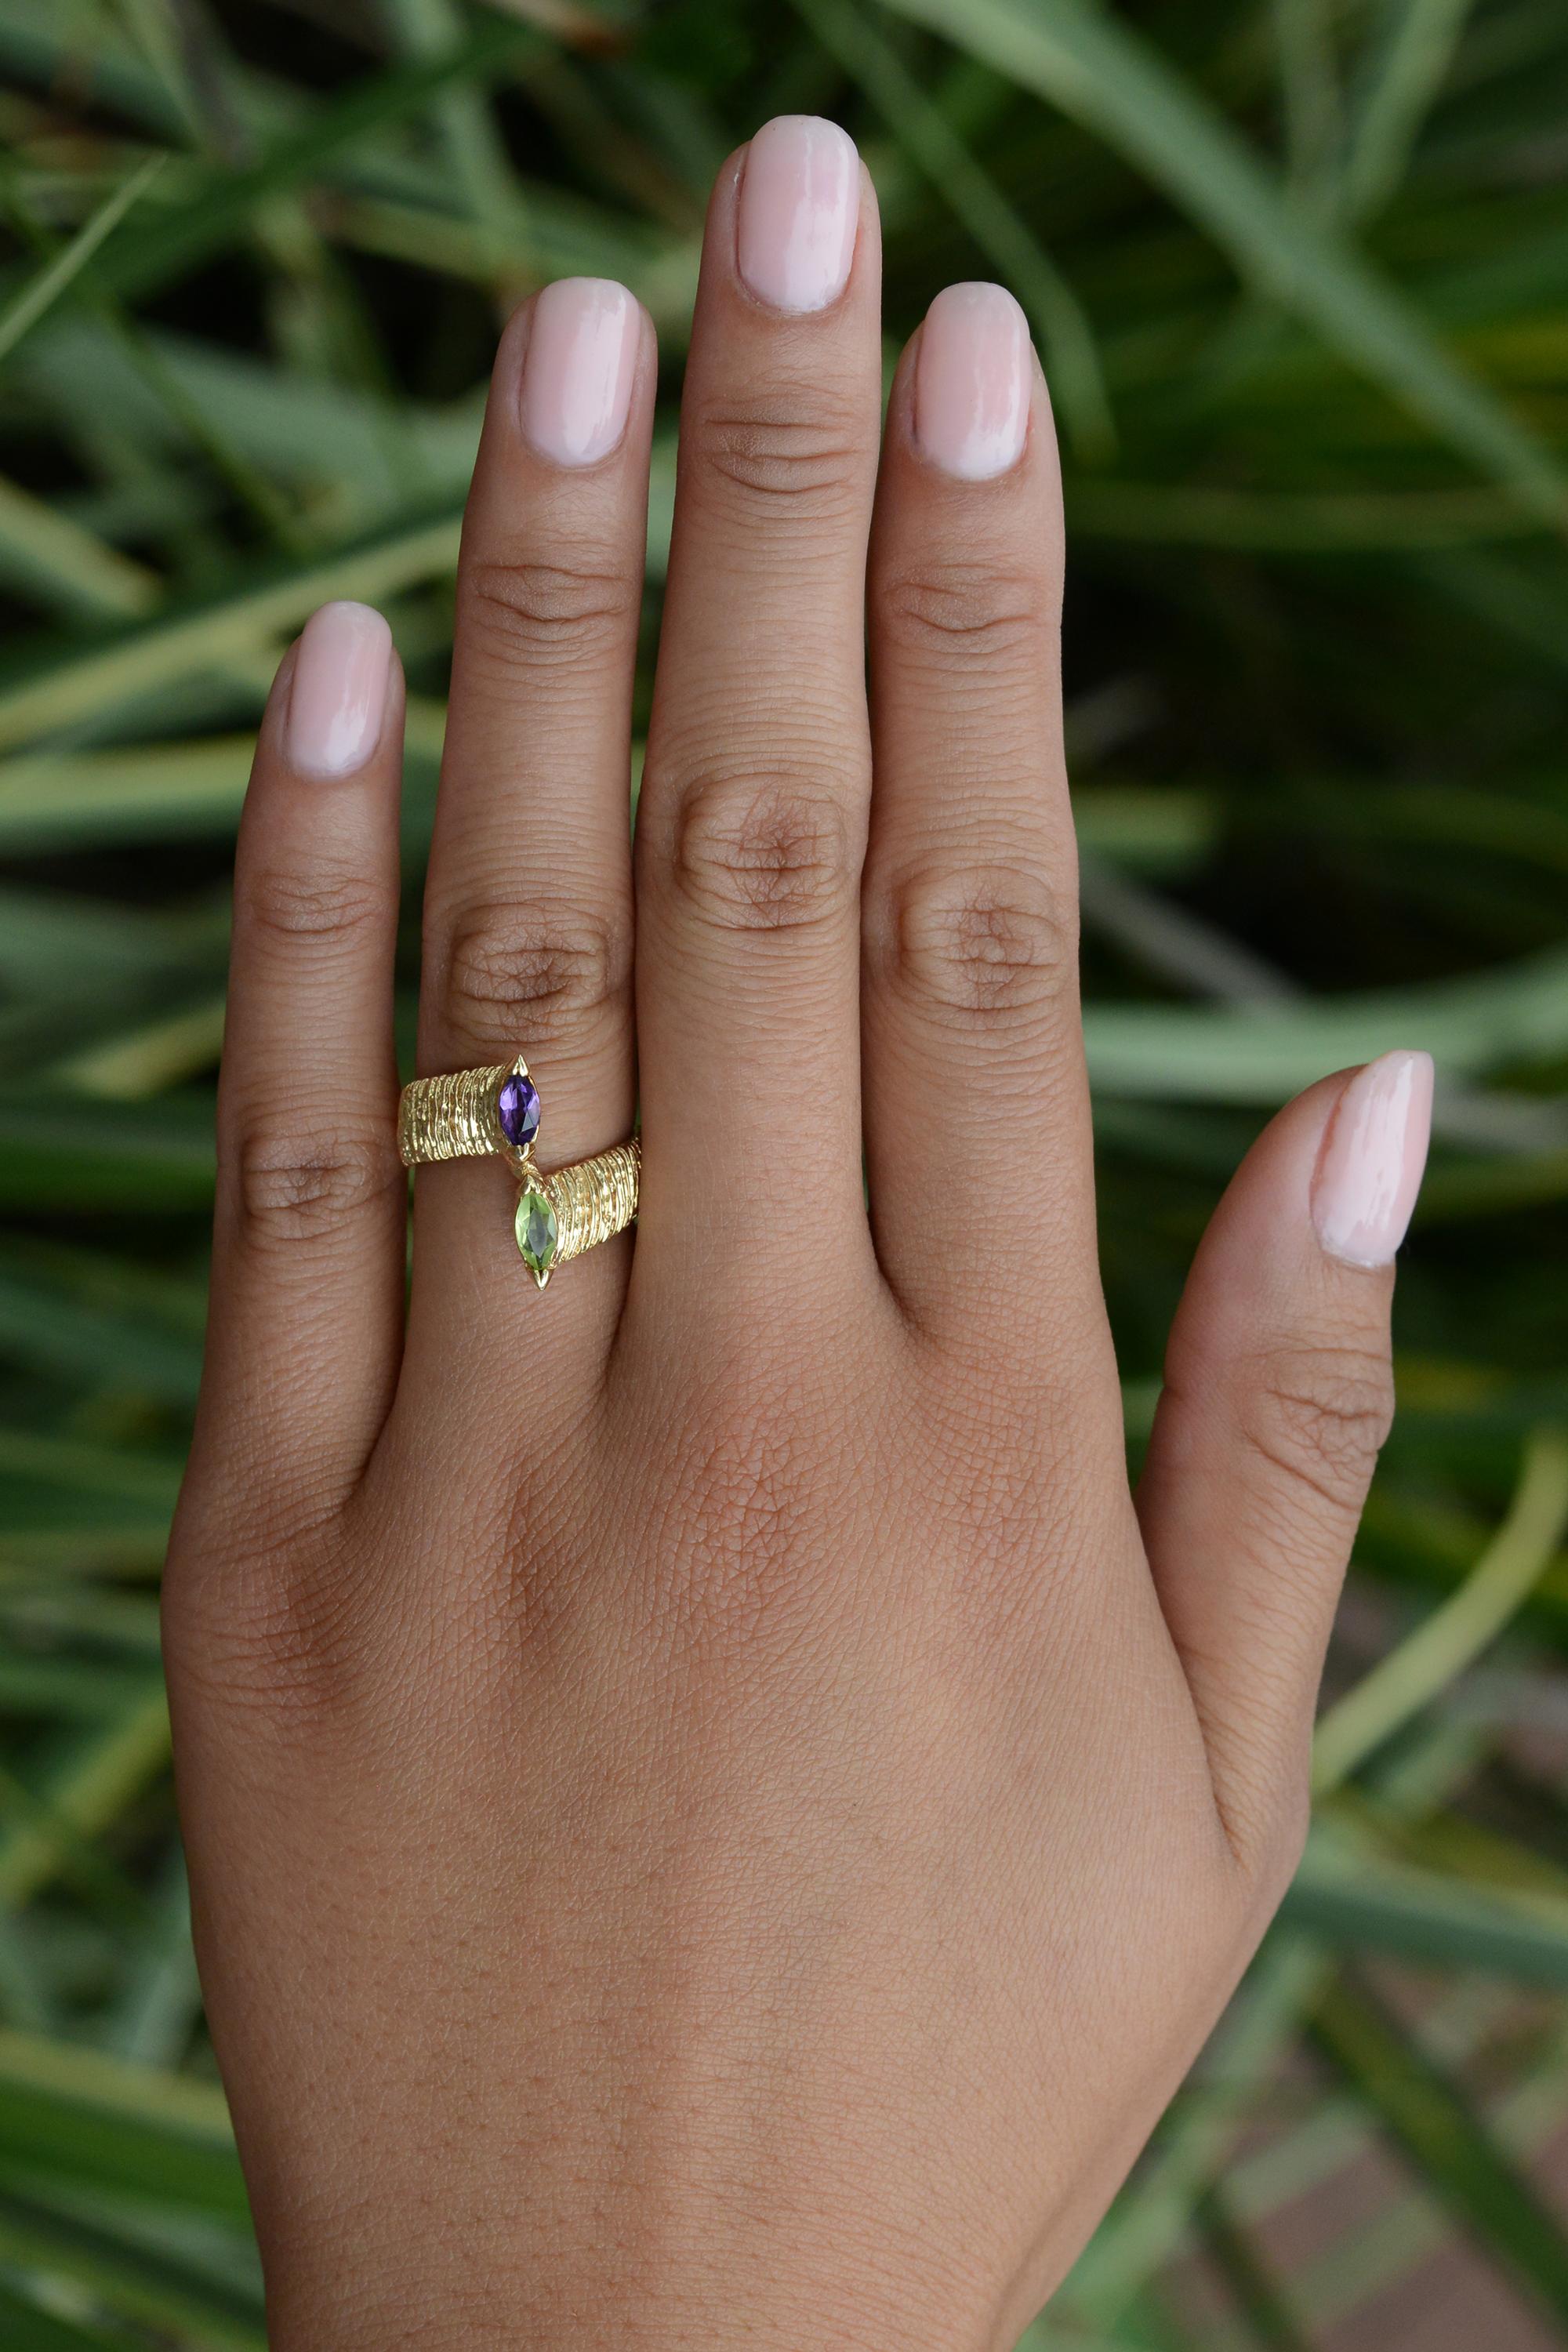 Sure to strike a conversation, this beautiful Brutalist vintage 1960s gemstone cocktail ring features two natural gemstones - an amethyst and a peridot - in a classic French toi et moi bypass setting. Crafted in a rough textured 14 karat yellow